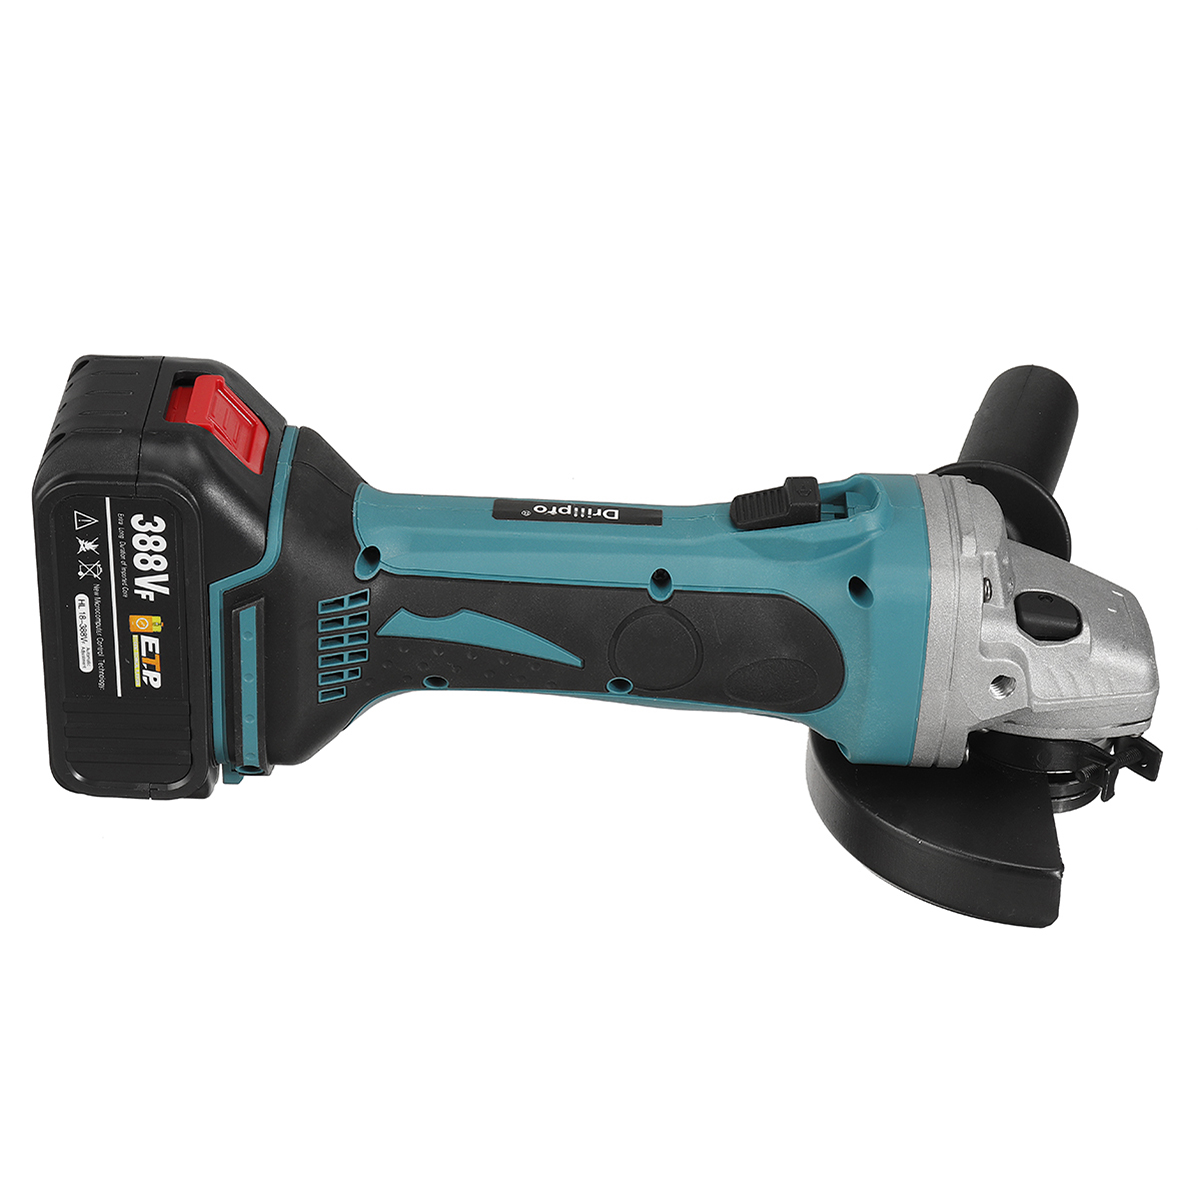 Drillpro-388VF-125mm-BlueBalck-Brushless-Motor-8500rpm-800W-Compact-Lithium-Electric-Polisher-1962696-11